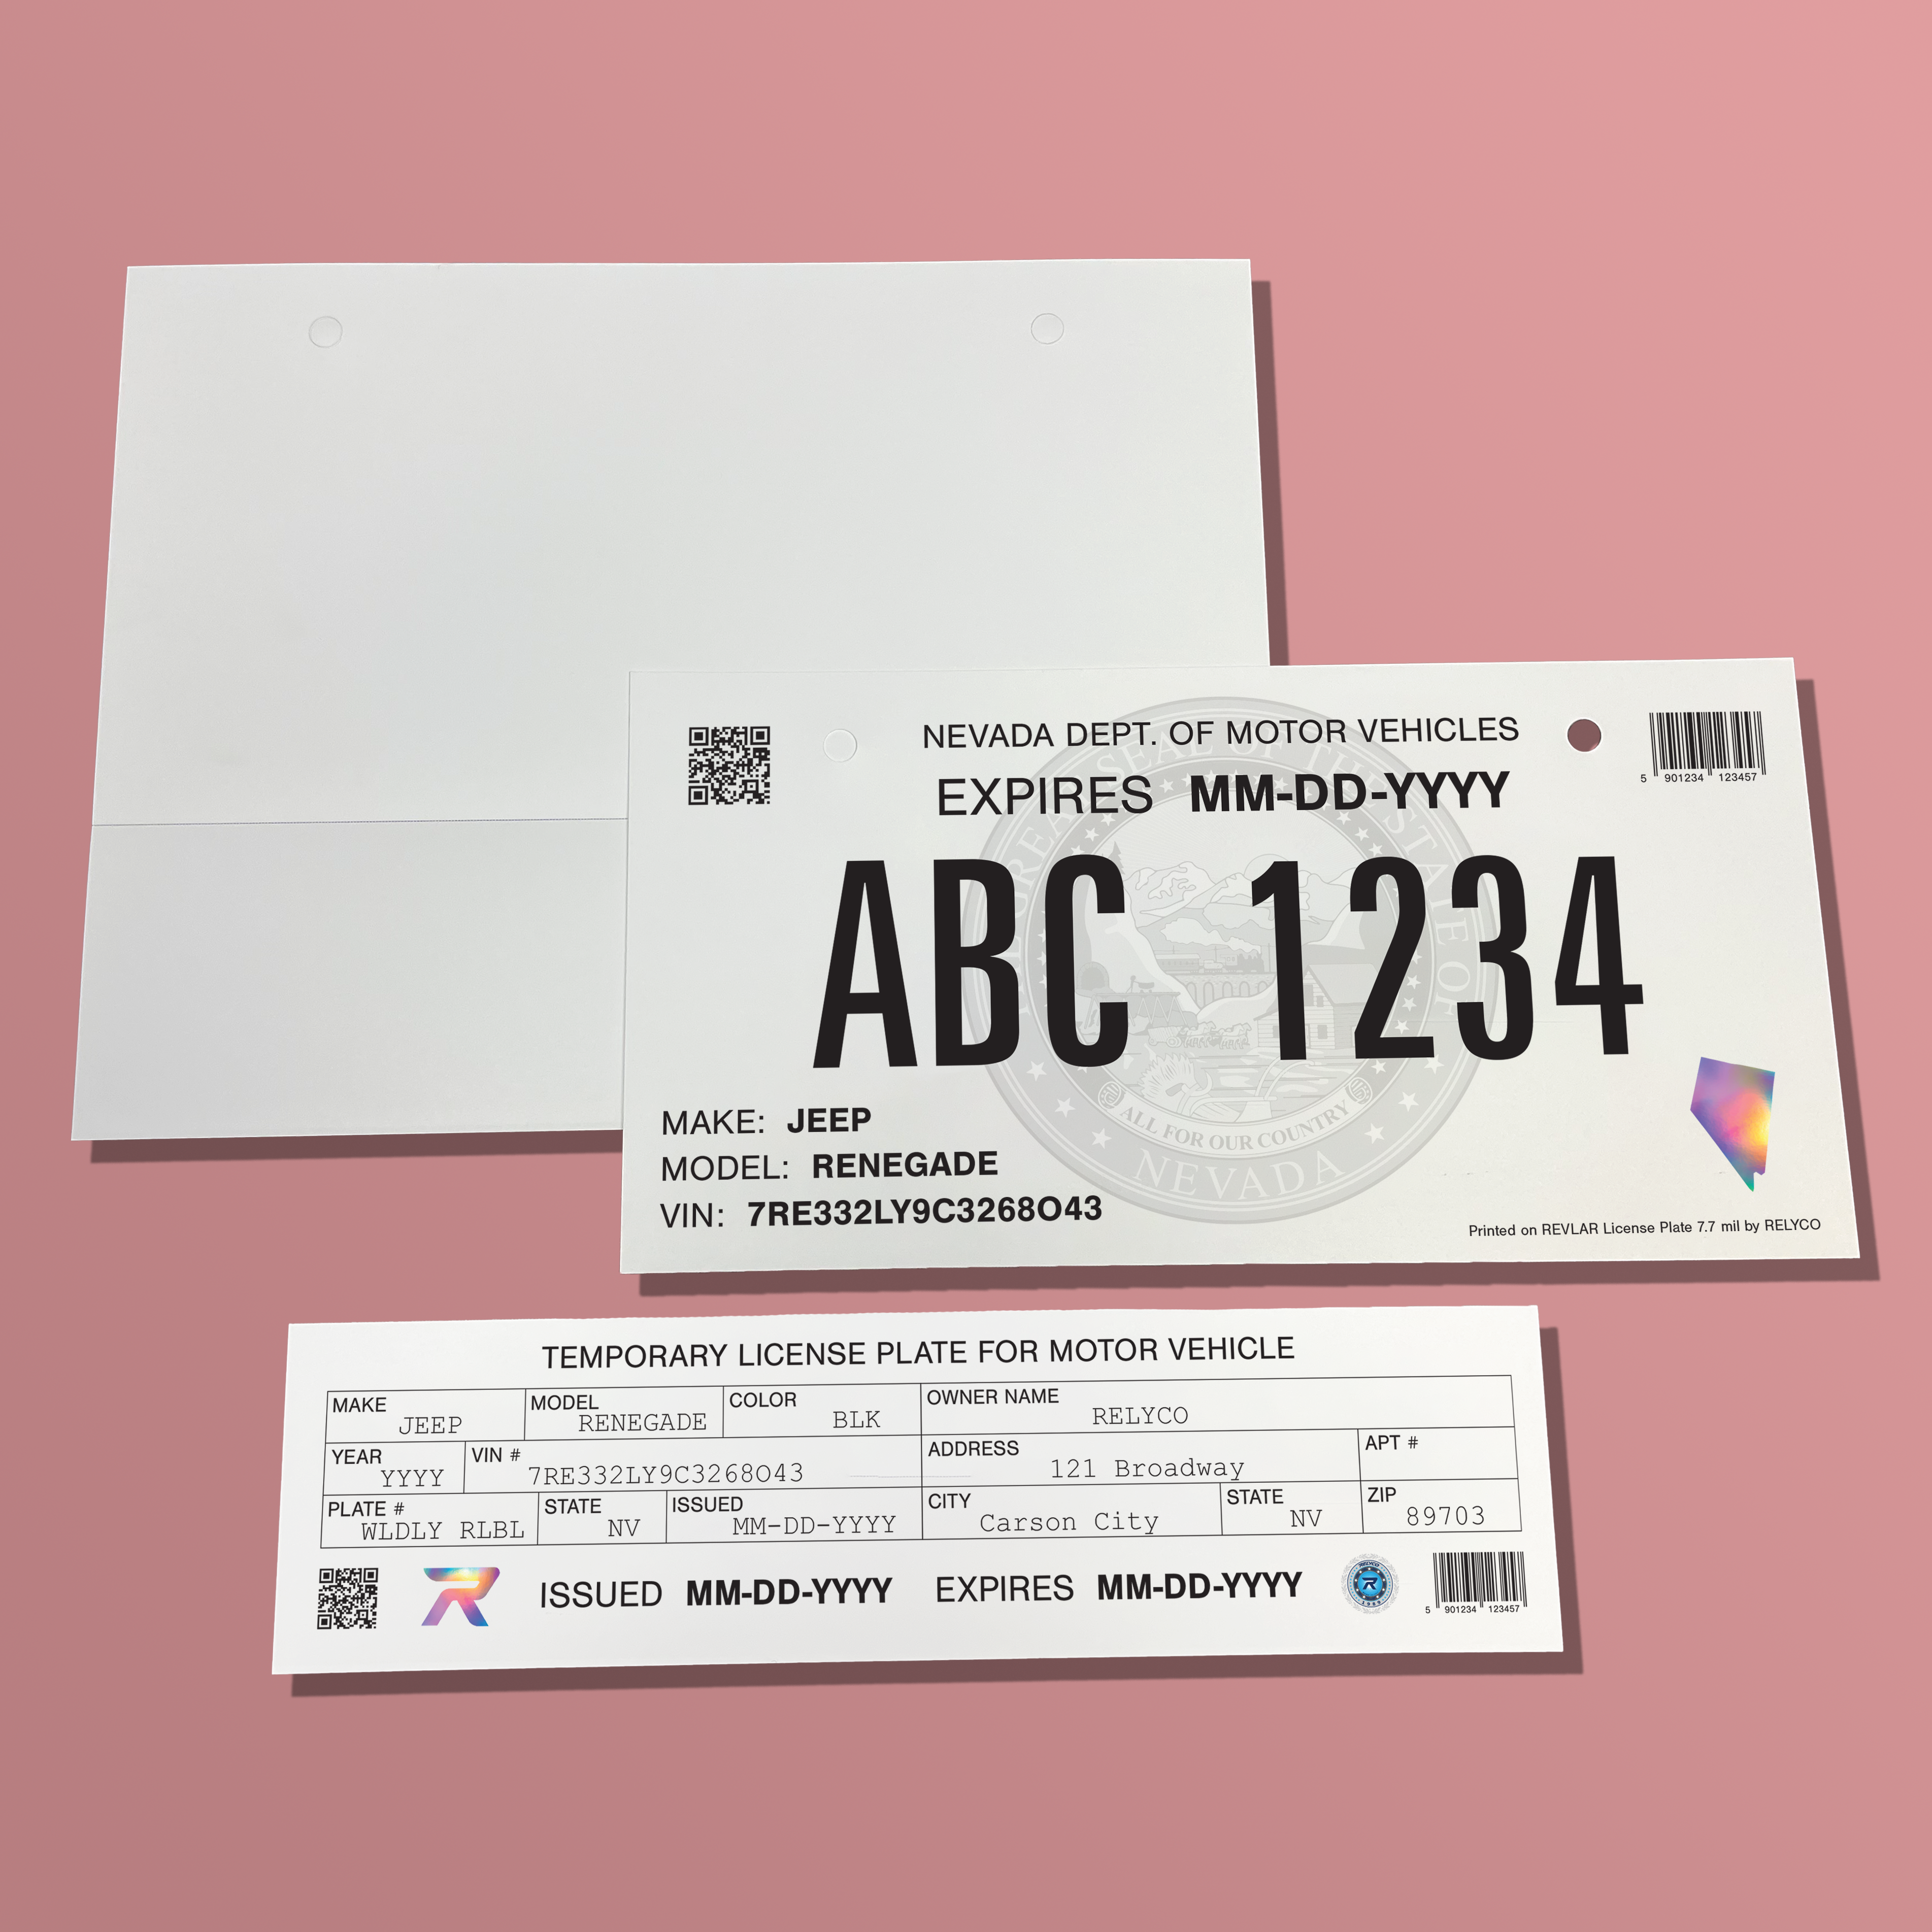 REVLAR® Temporary License Plate - Inkjet Printer Only with Tear-Out Record (500 Sheets) 7.7 mil